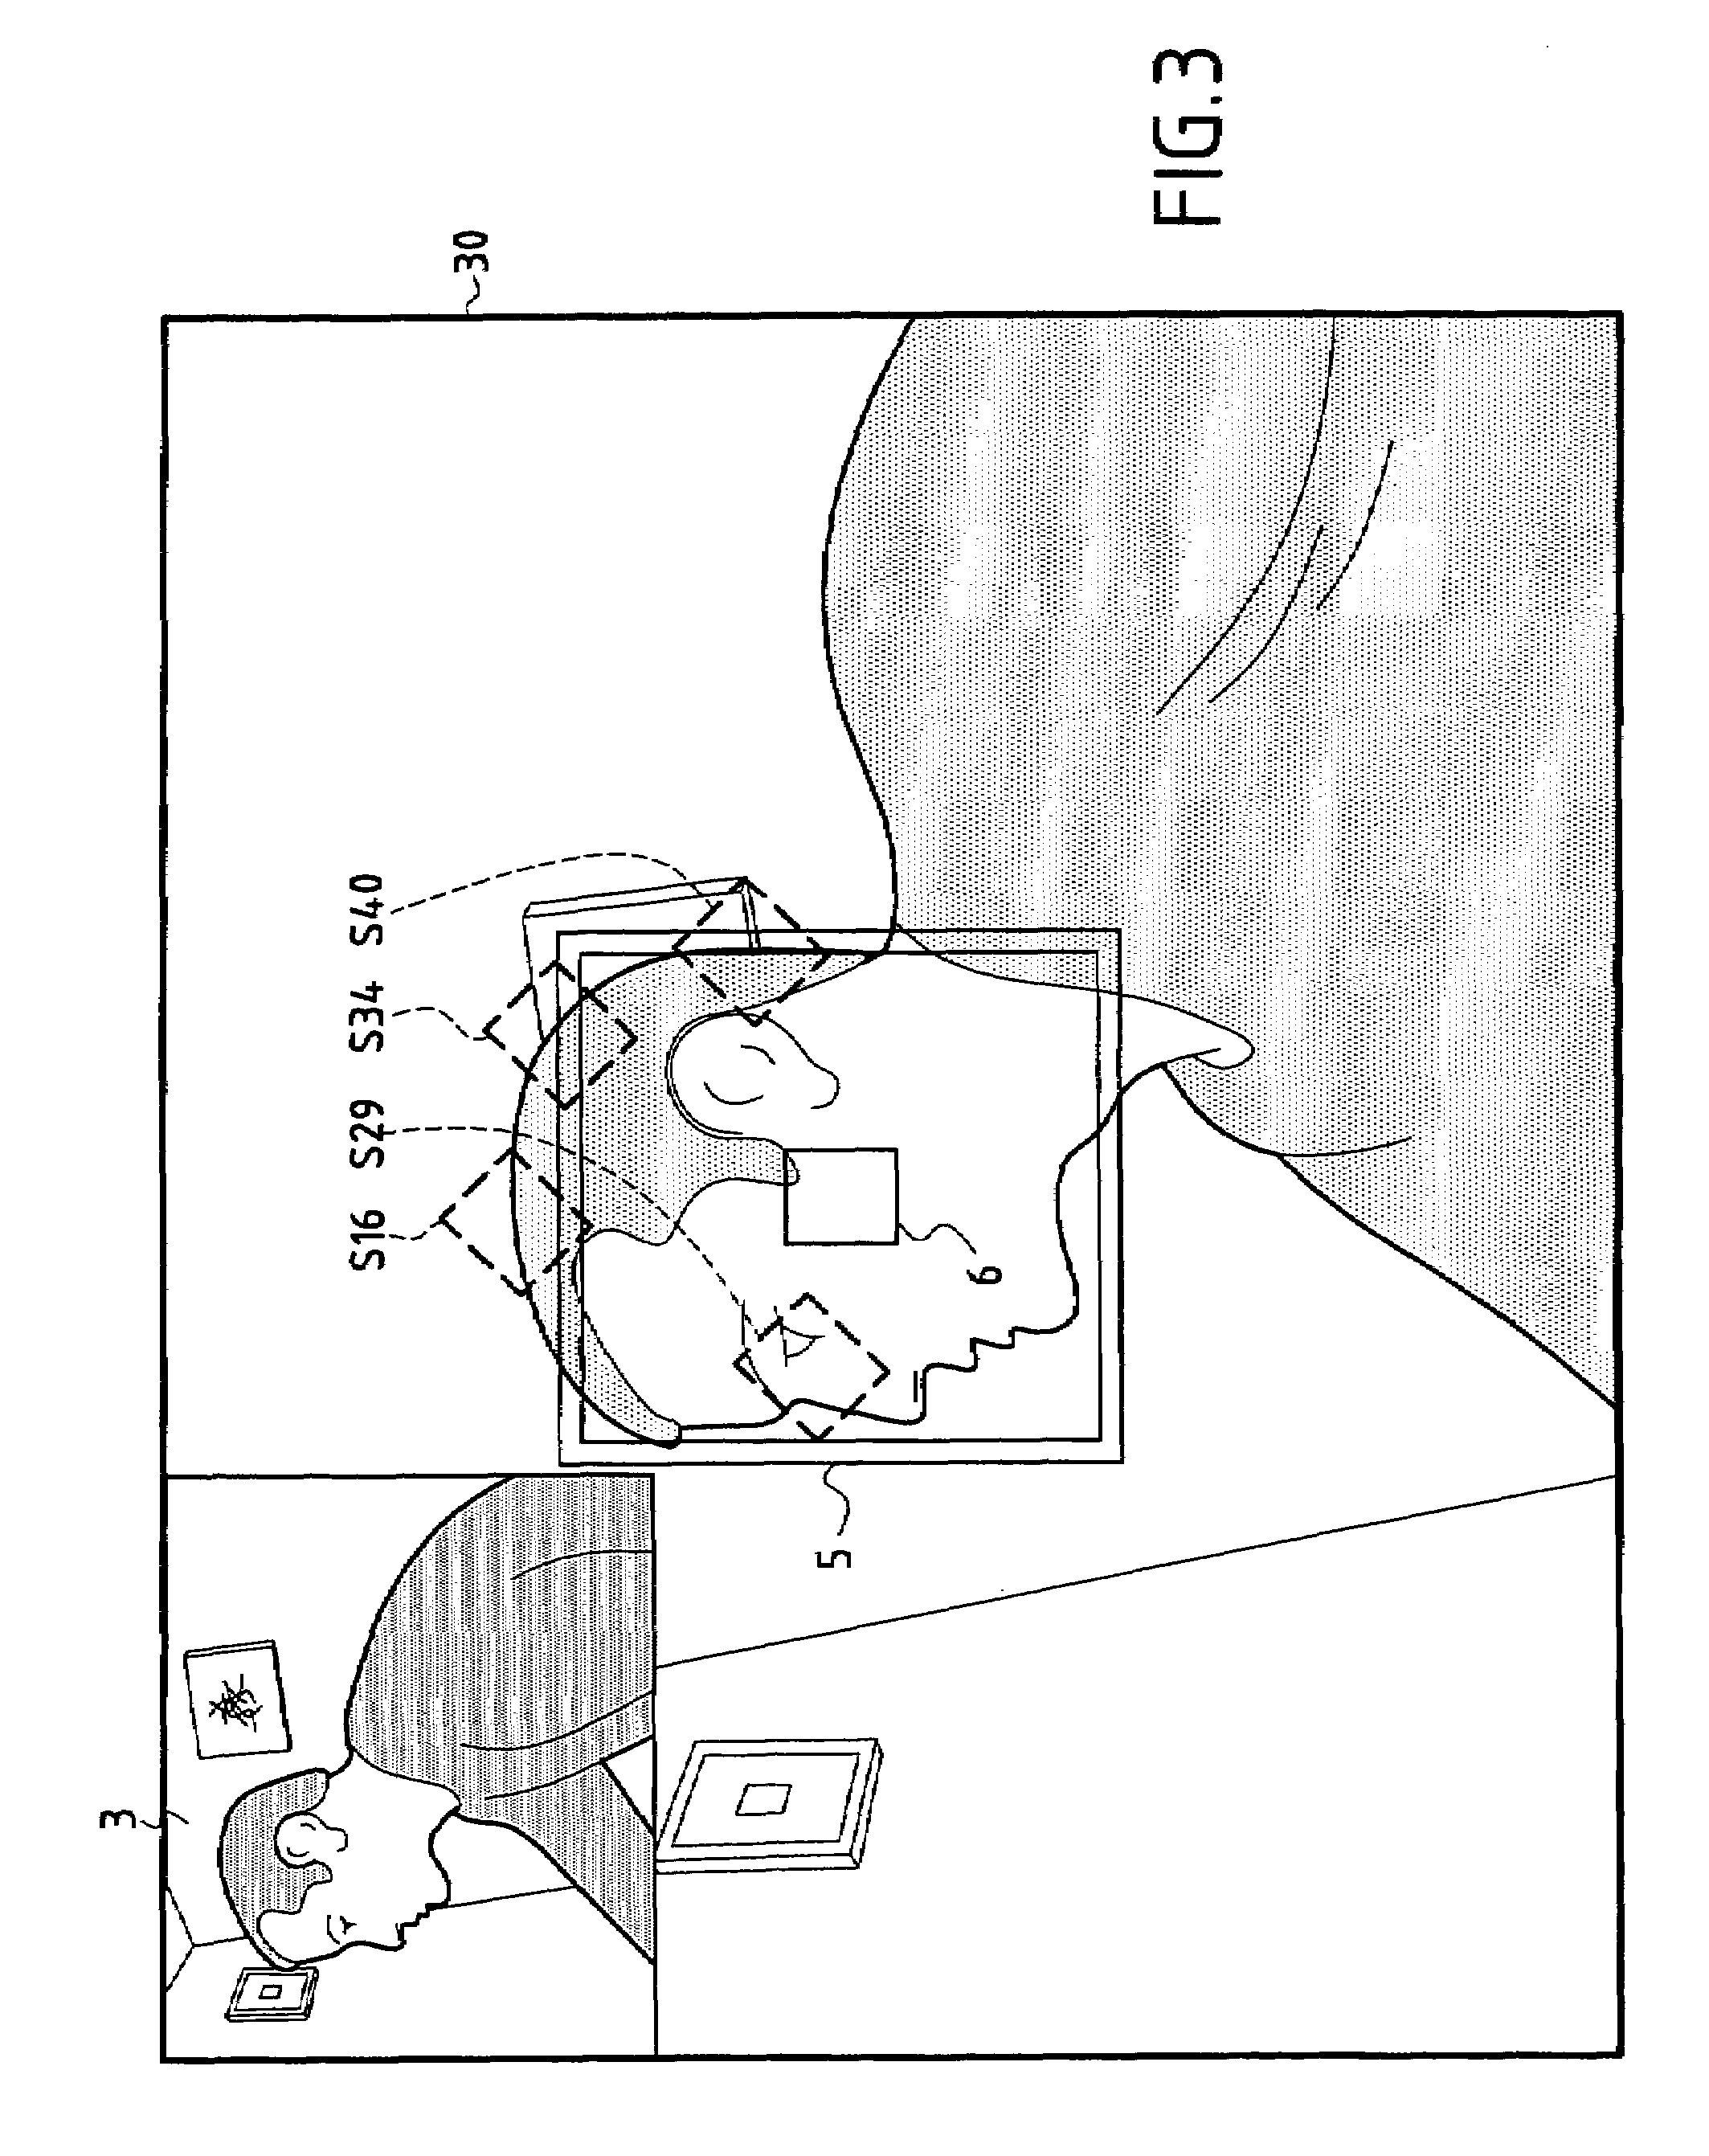 Adaptive artificial vision method and system